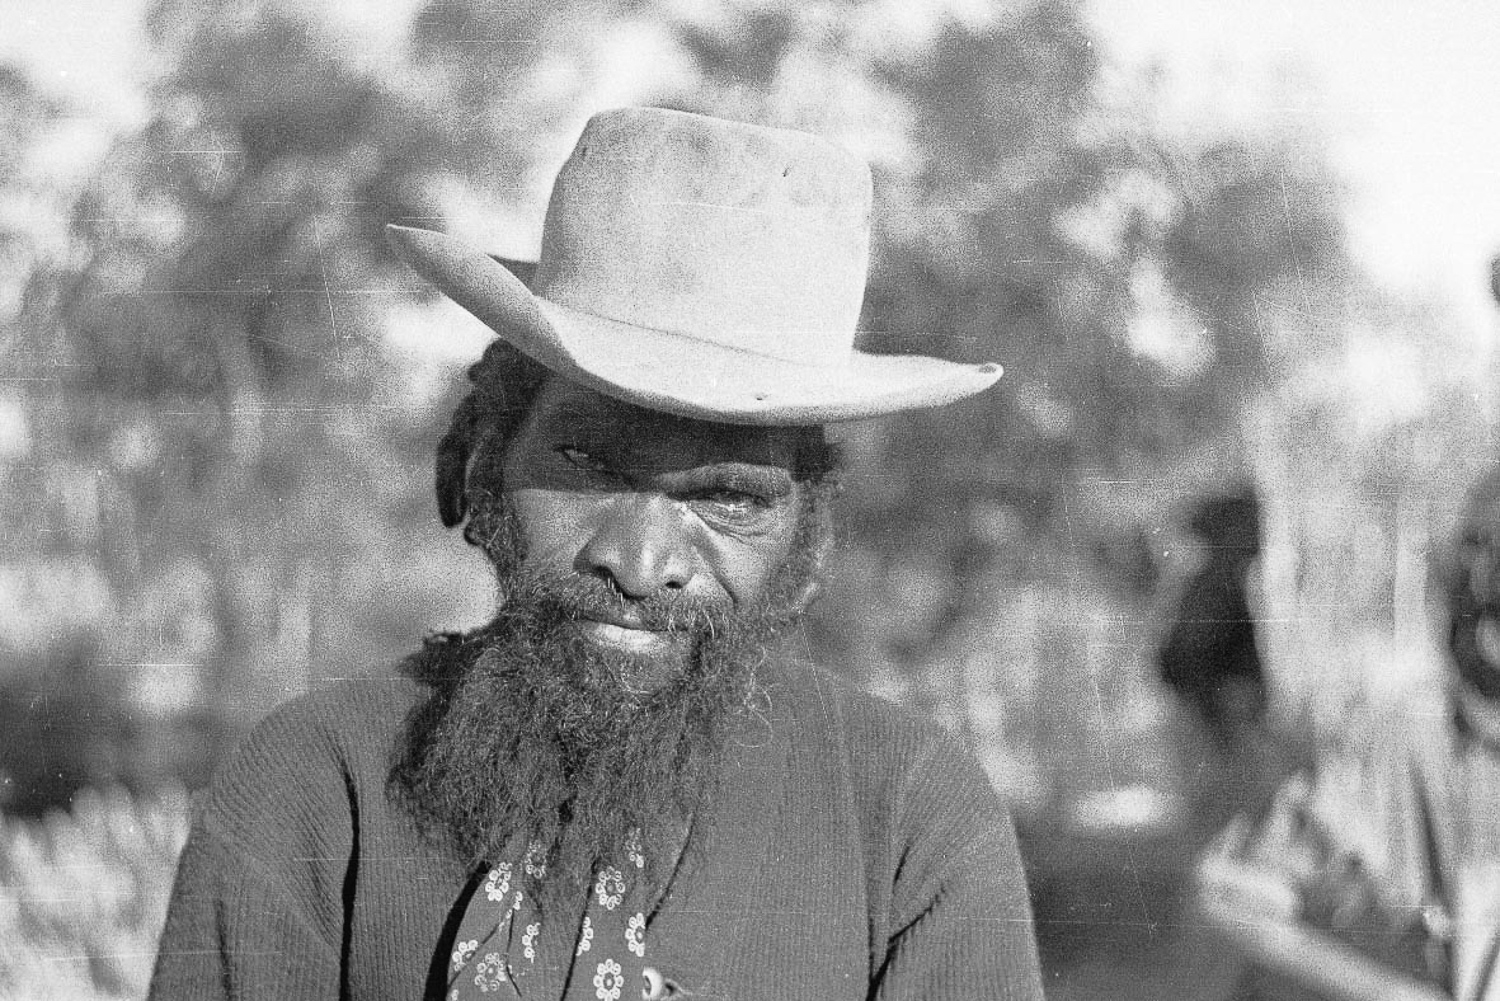 Frank Hogan (relative of Rusty Hogan, above) one of the many Anangu people ‘brought in’ to Cundeelee mission from Spinifex Country. Many of the original elders who were brought in from the bush are passing away, making historical collections of photographs such as these extremely valuable. 